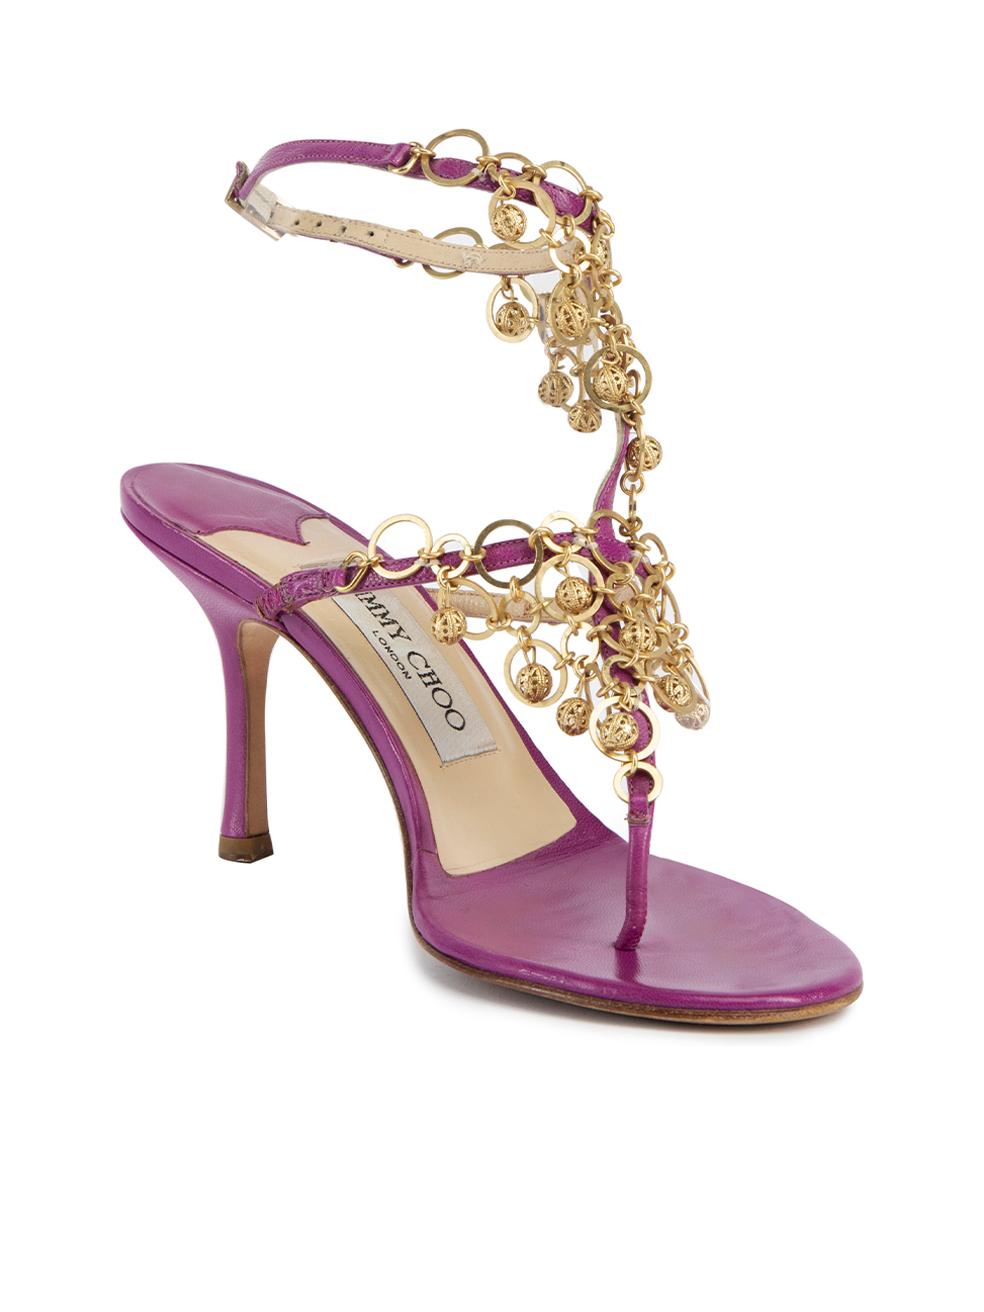 CONDITION is Very good. Hardly any visible wear to heel is evident. Slight marks to both heels can be seen on this used Jimmy choo designer resale item. Details Purple Leather Thong sandals Mid heel Ankle strap closure Gold tone circle charms accent